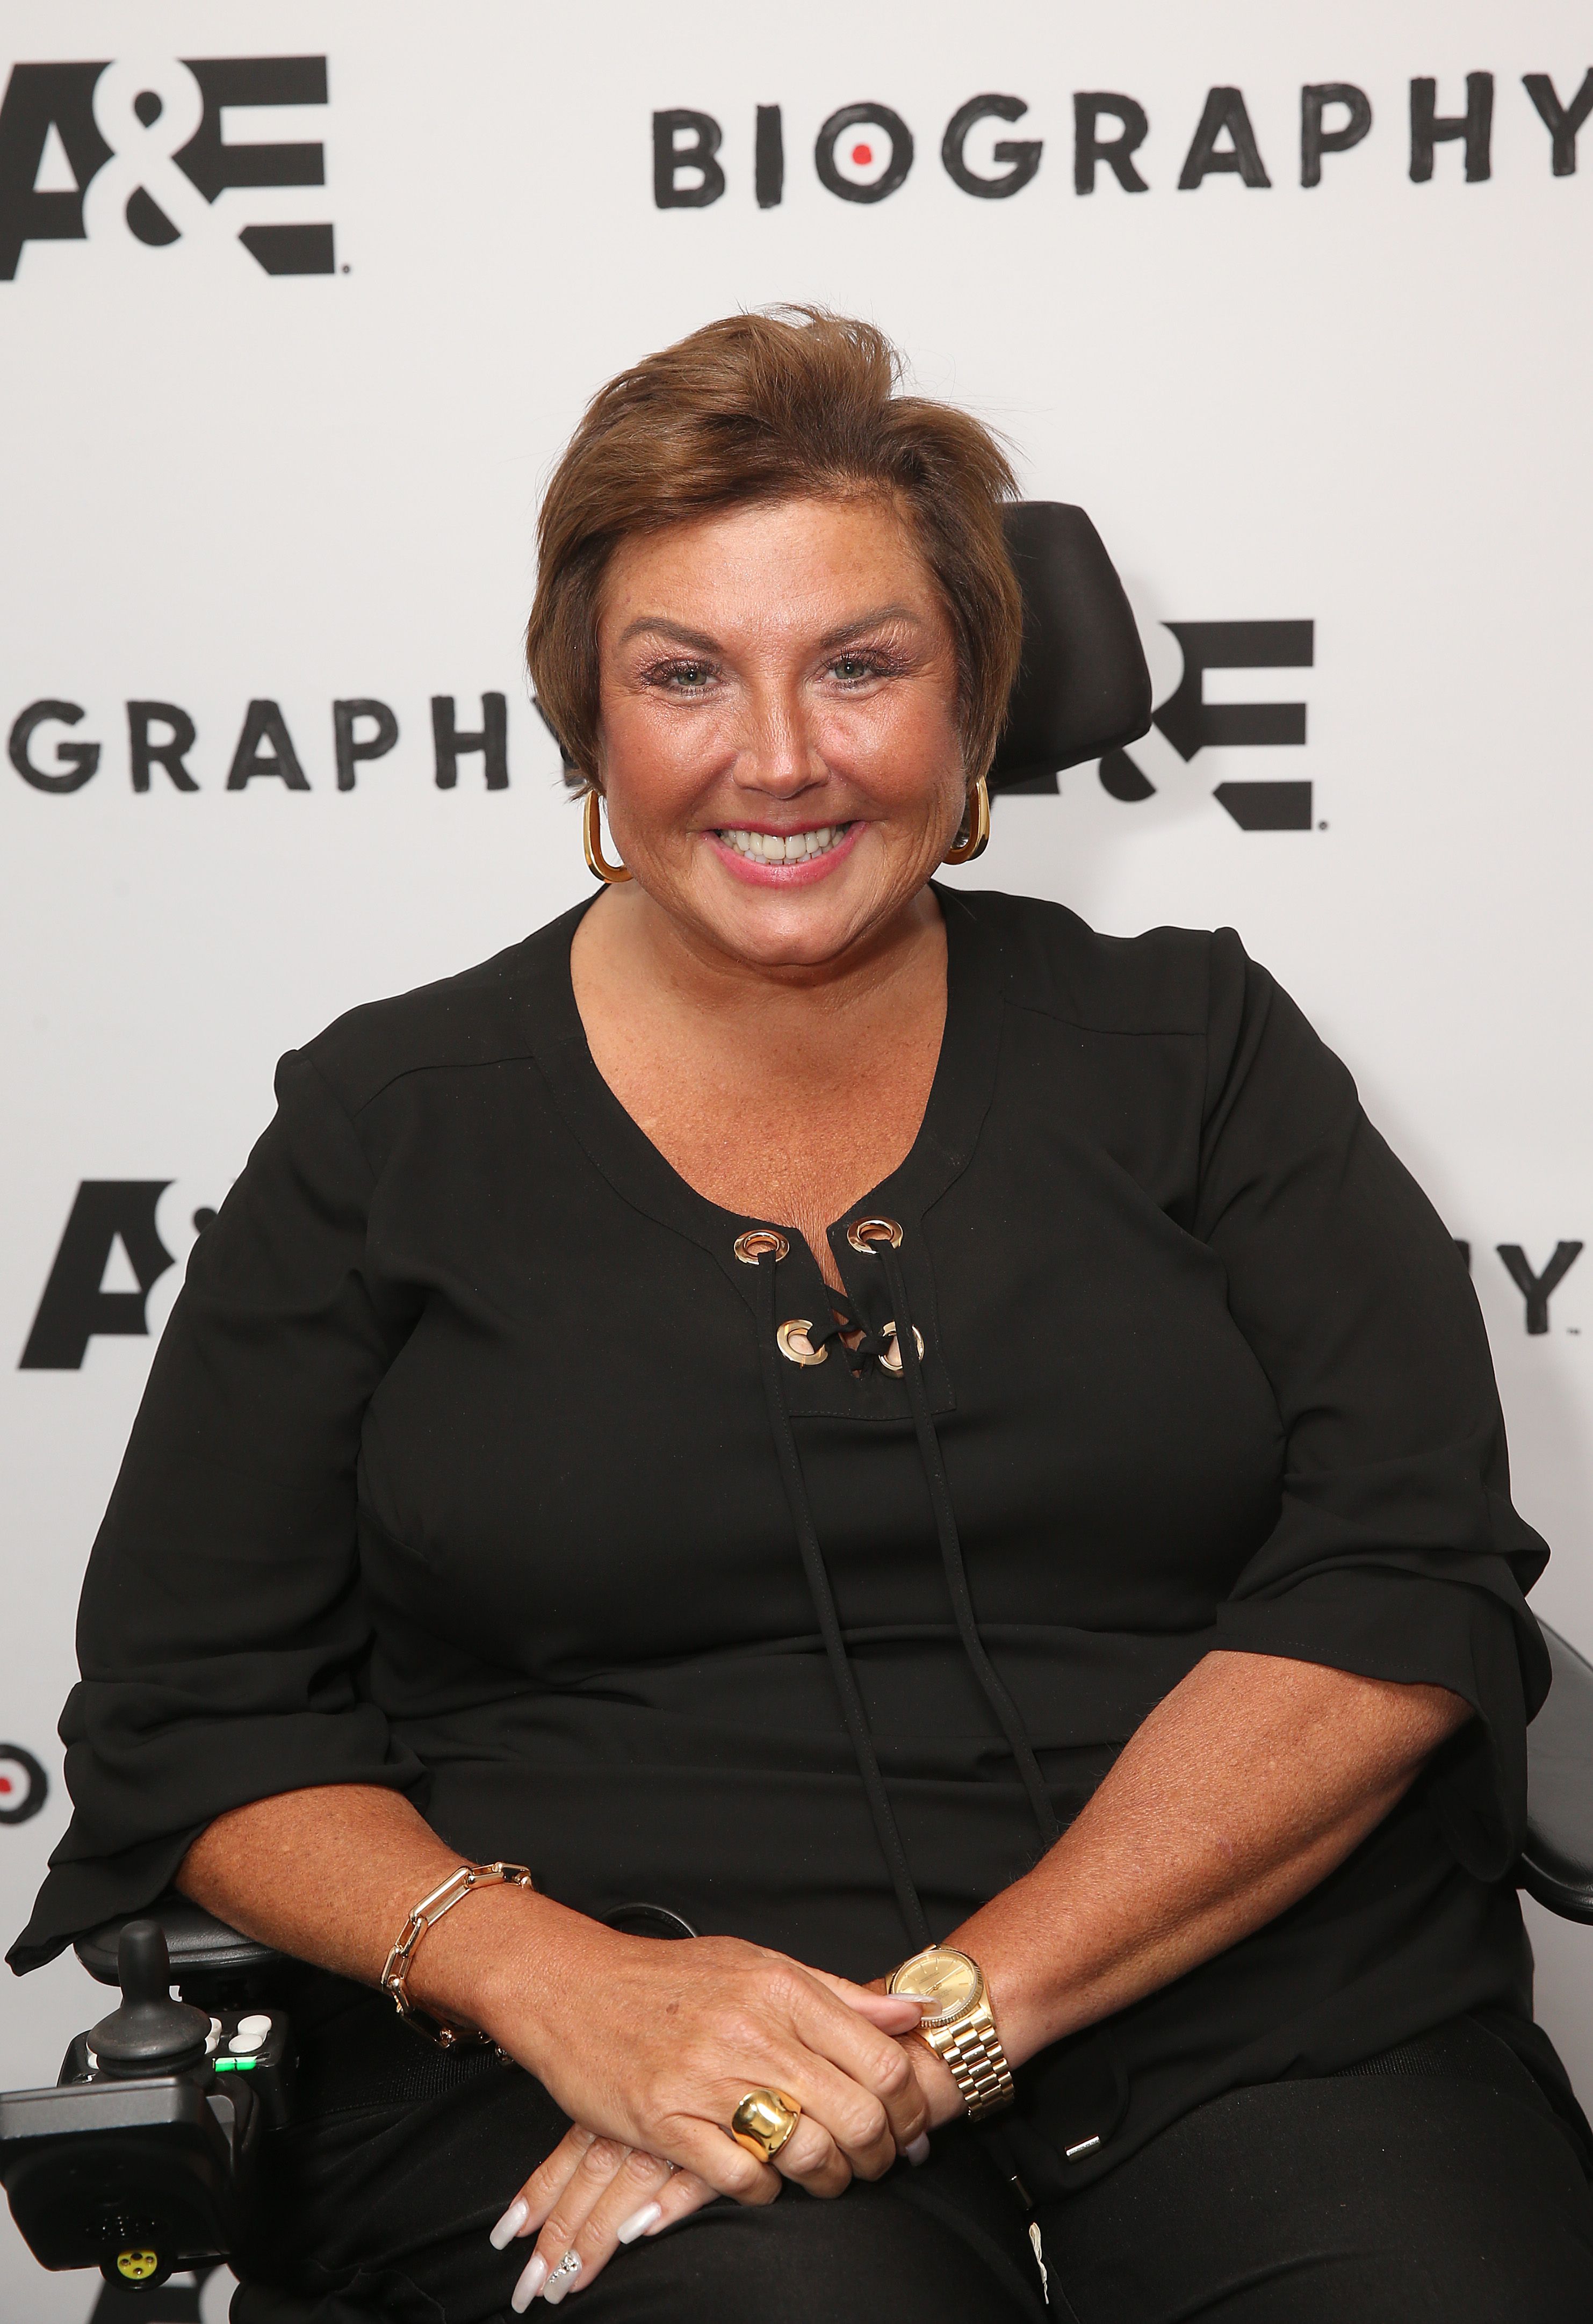 Abby Lee Miller of 'Dance Moms' Had Plastic Surgery While Awake And